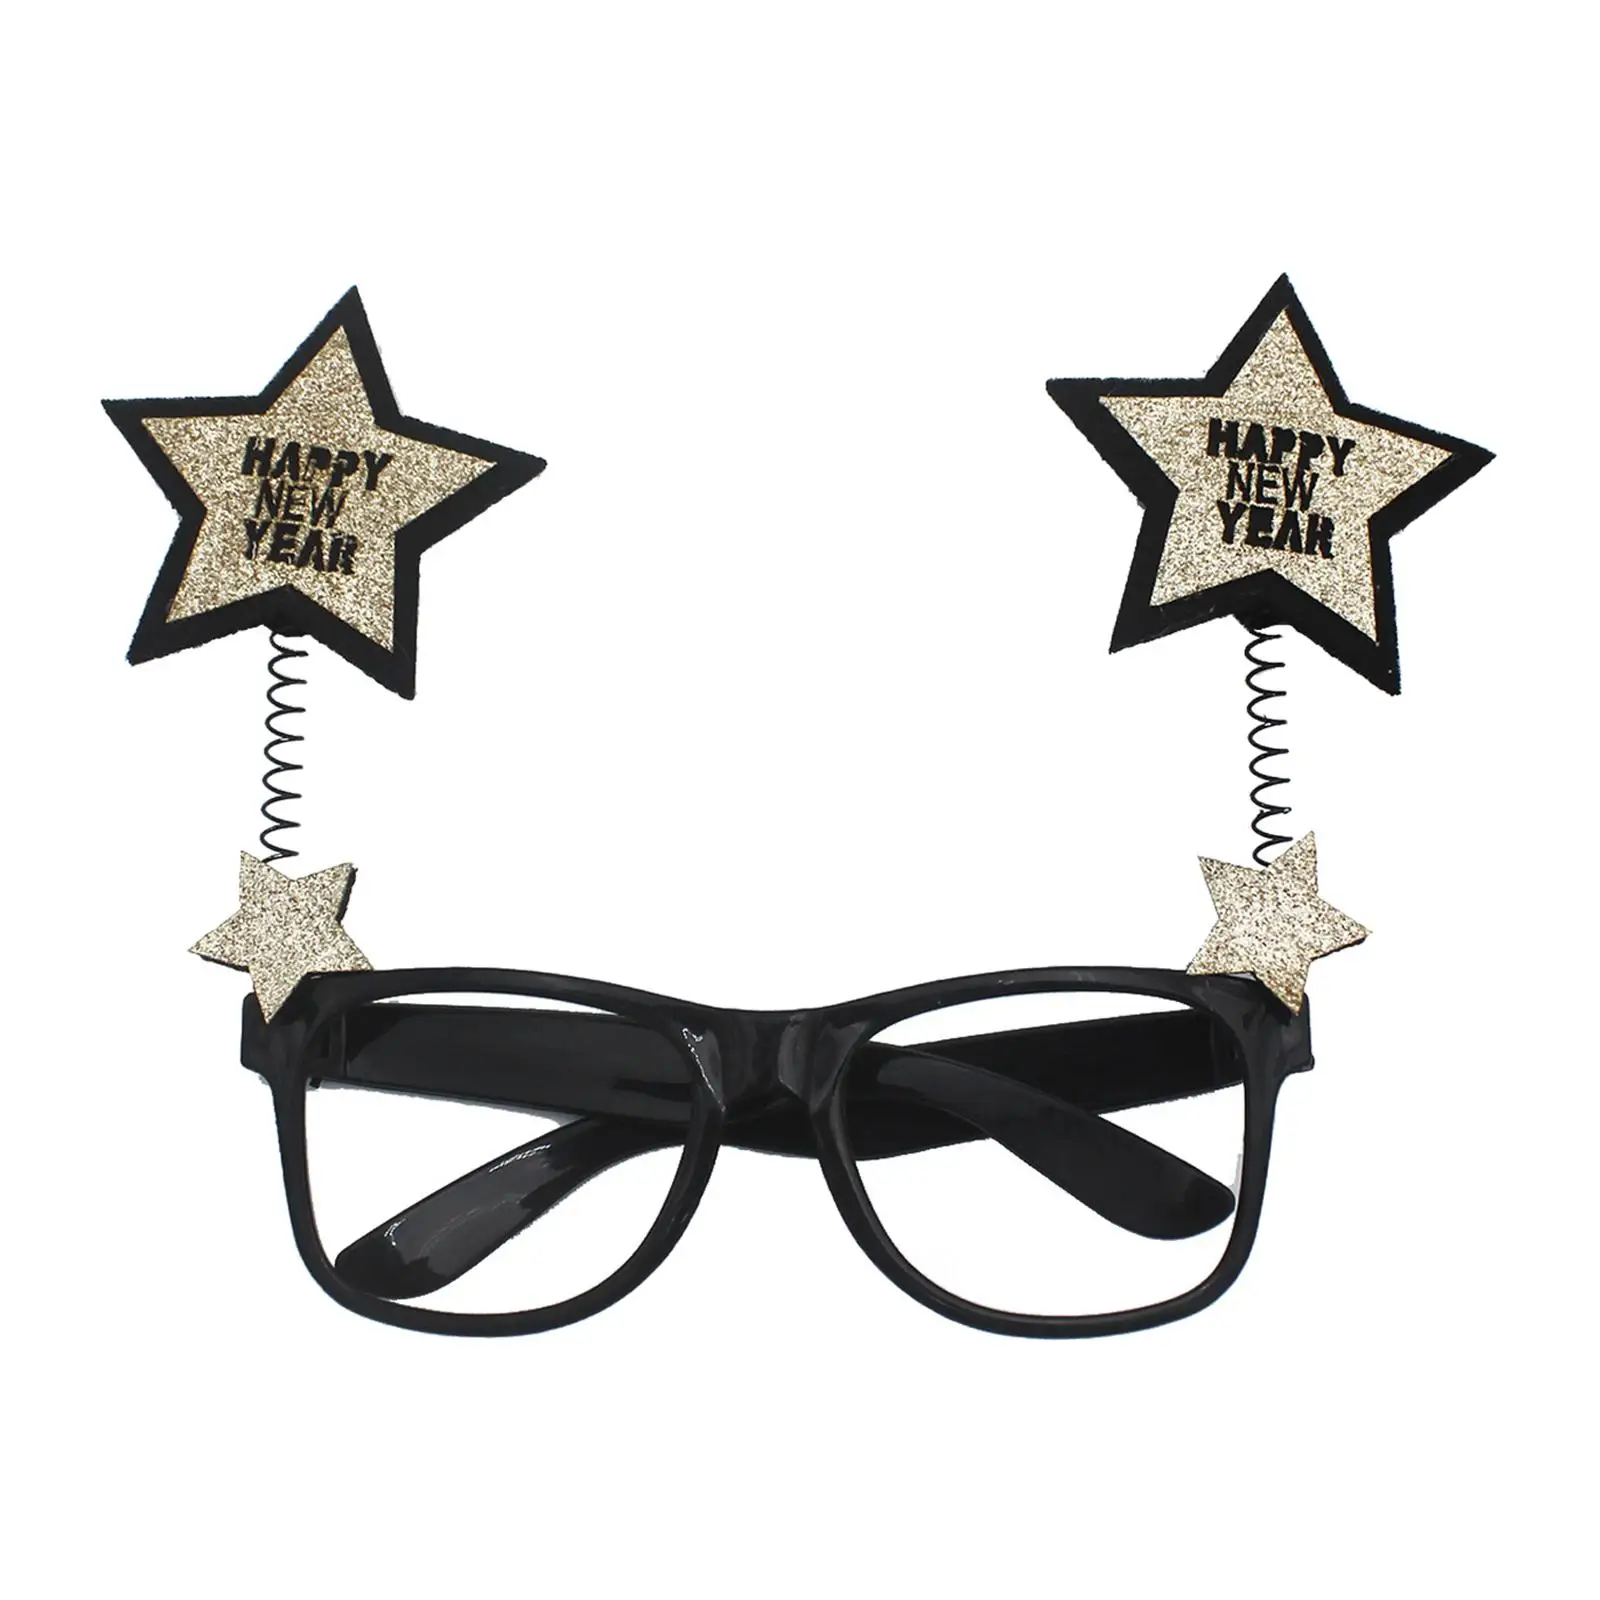 Fashion New Year Glasses Frame Party Supplies Fancy Eyeglasses Booth Props Costume Accessories for Carnival Decoration